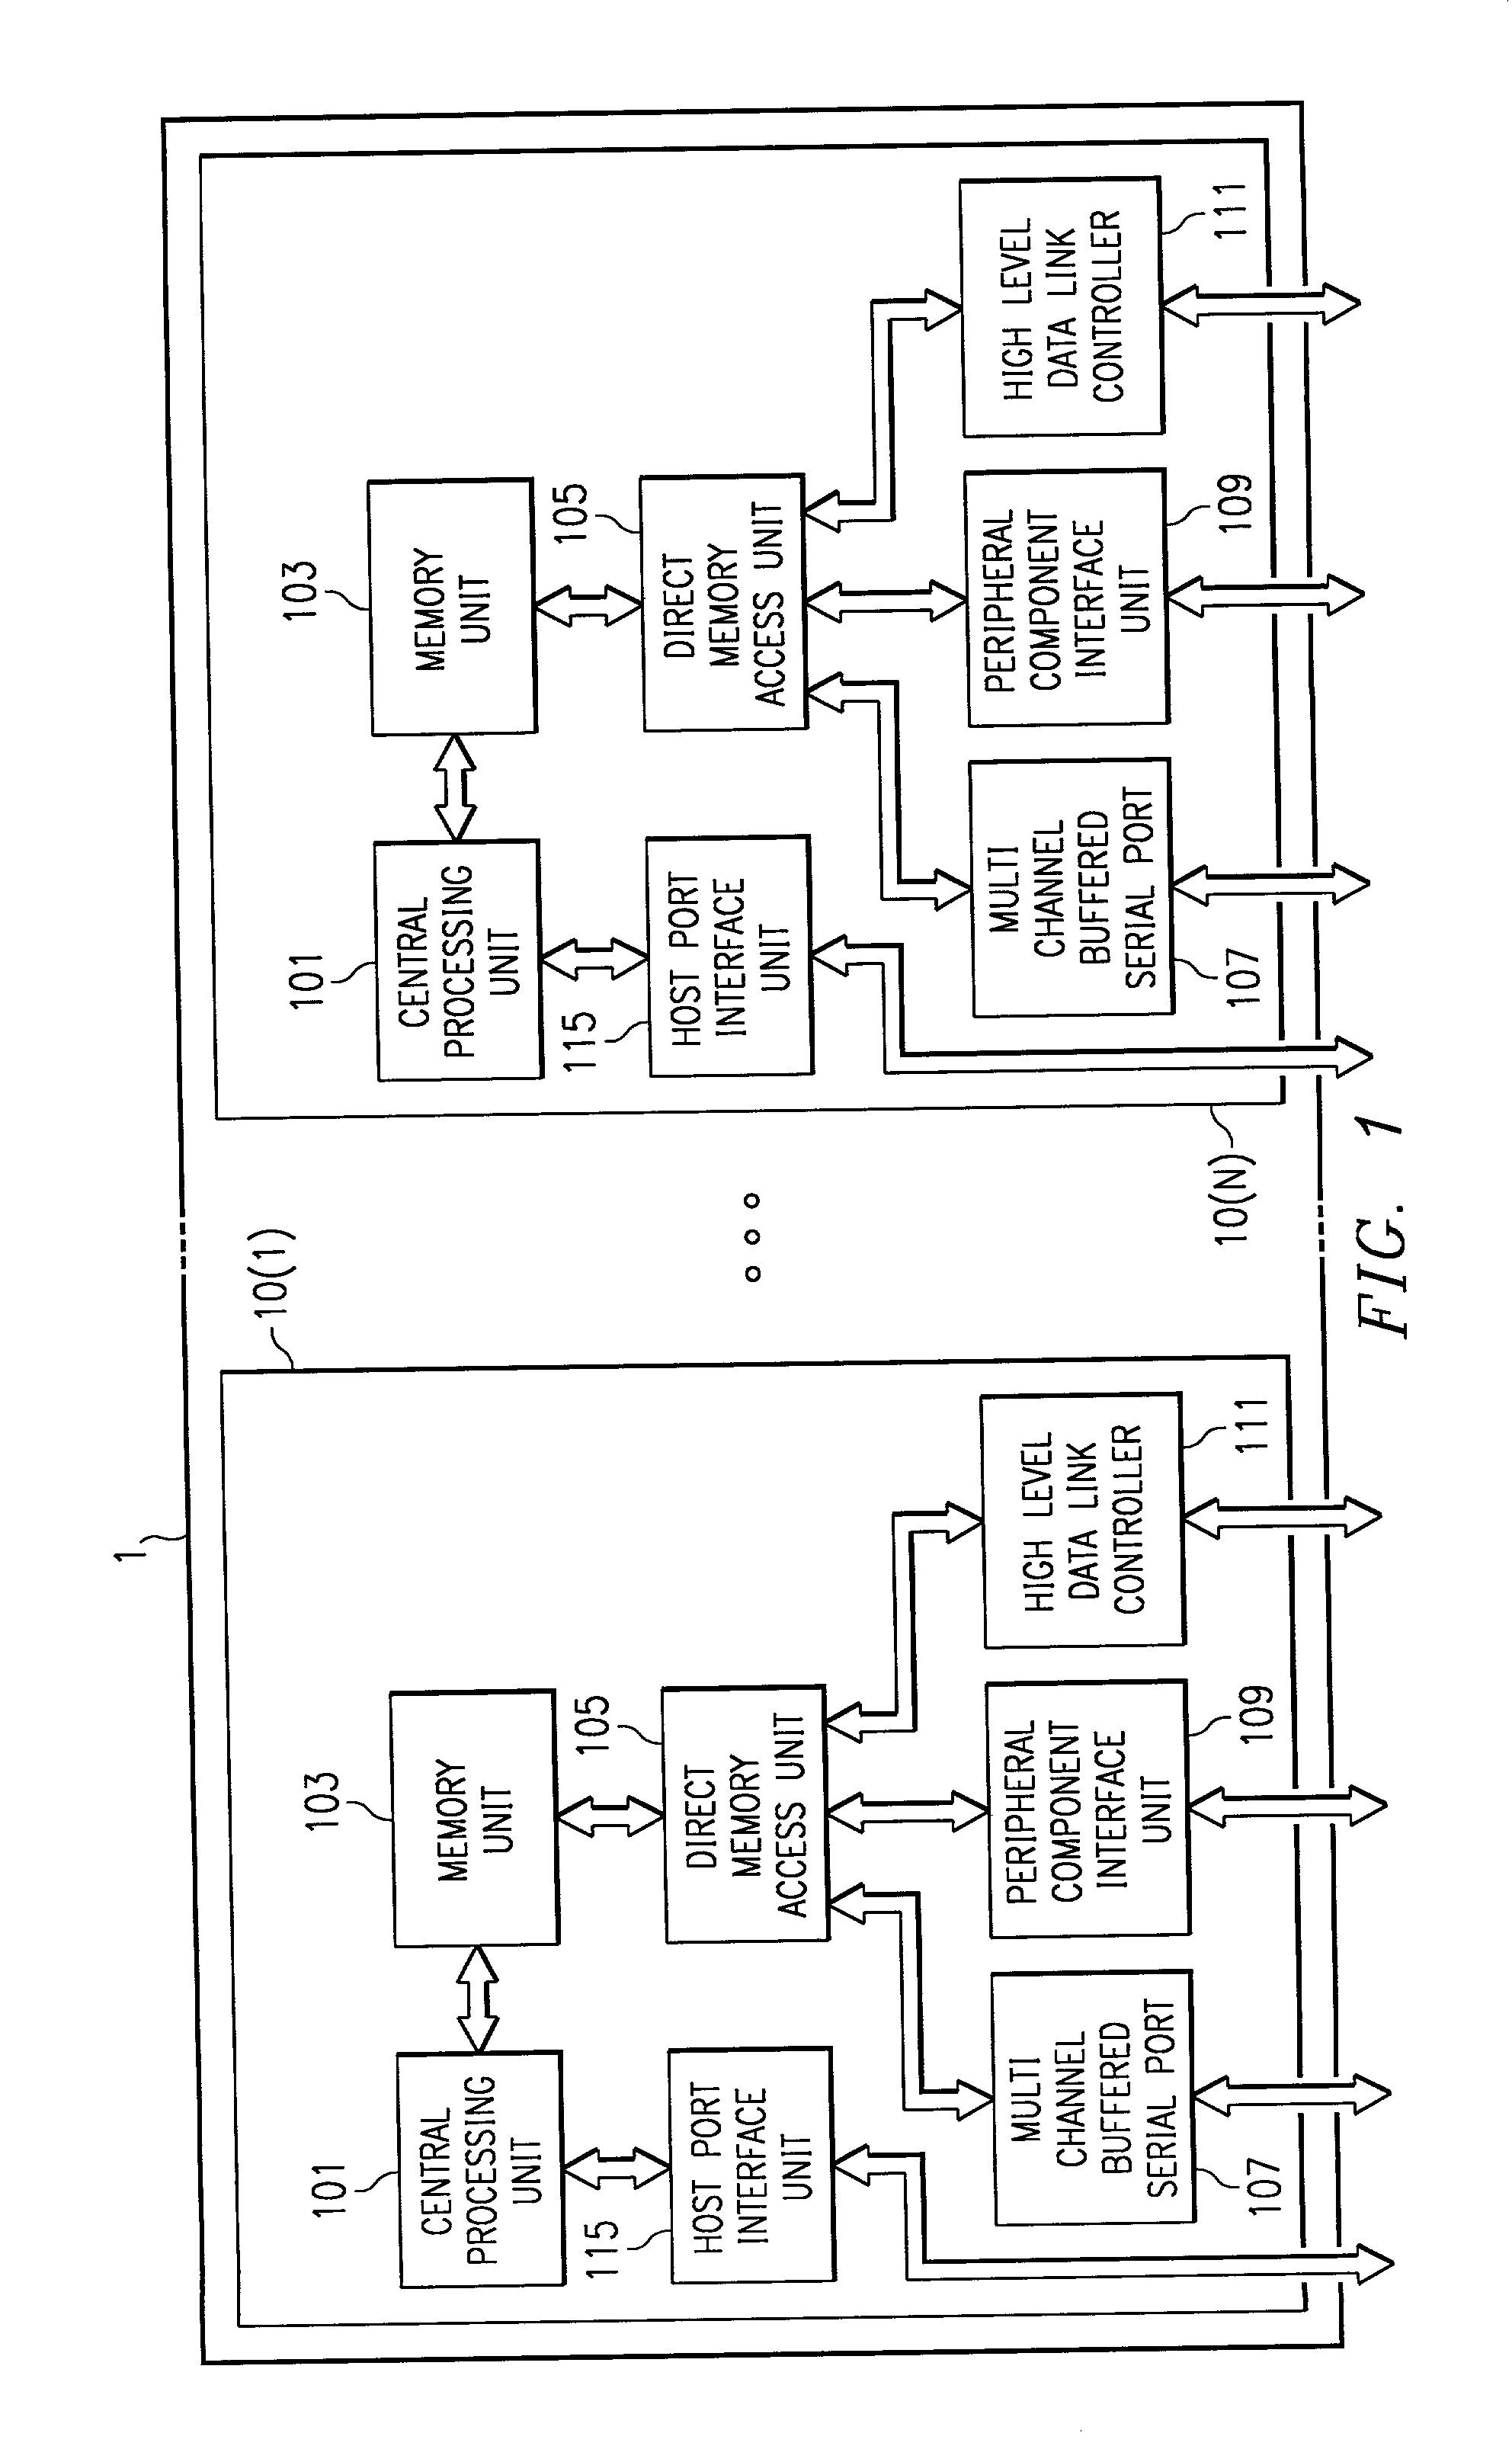 Apparatus and method for controlling block signal flow in a multi digital signal processor configuration from a shared peripheral direct memory controller to high level data link controller